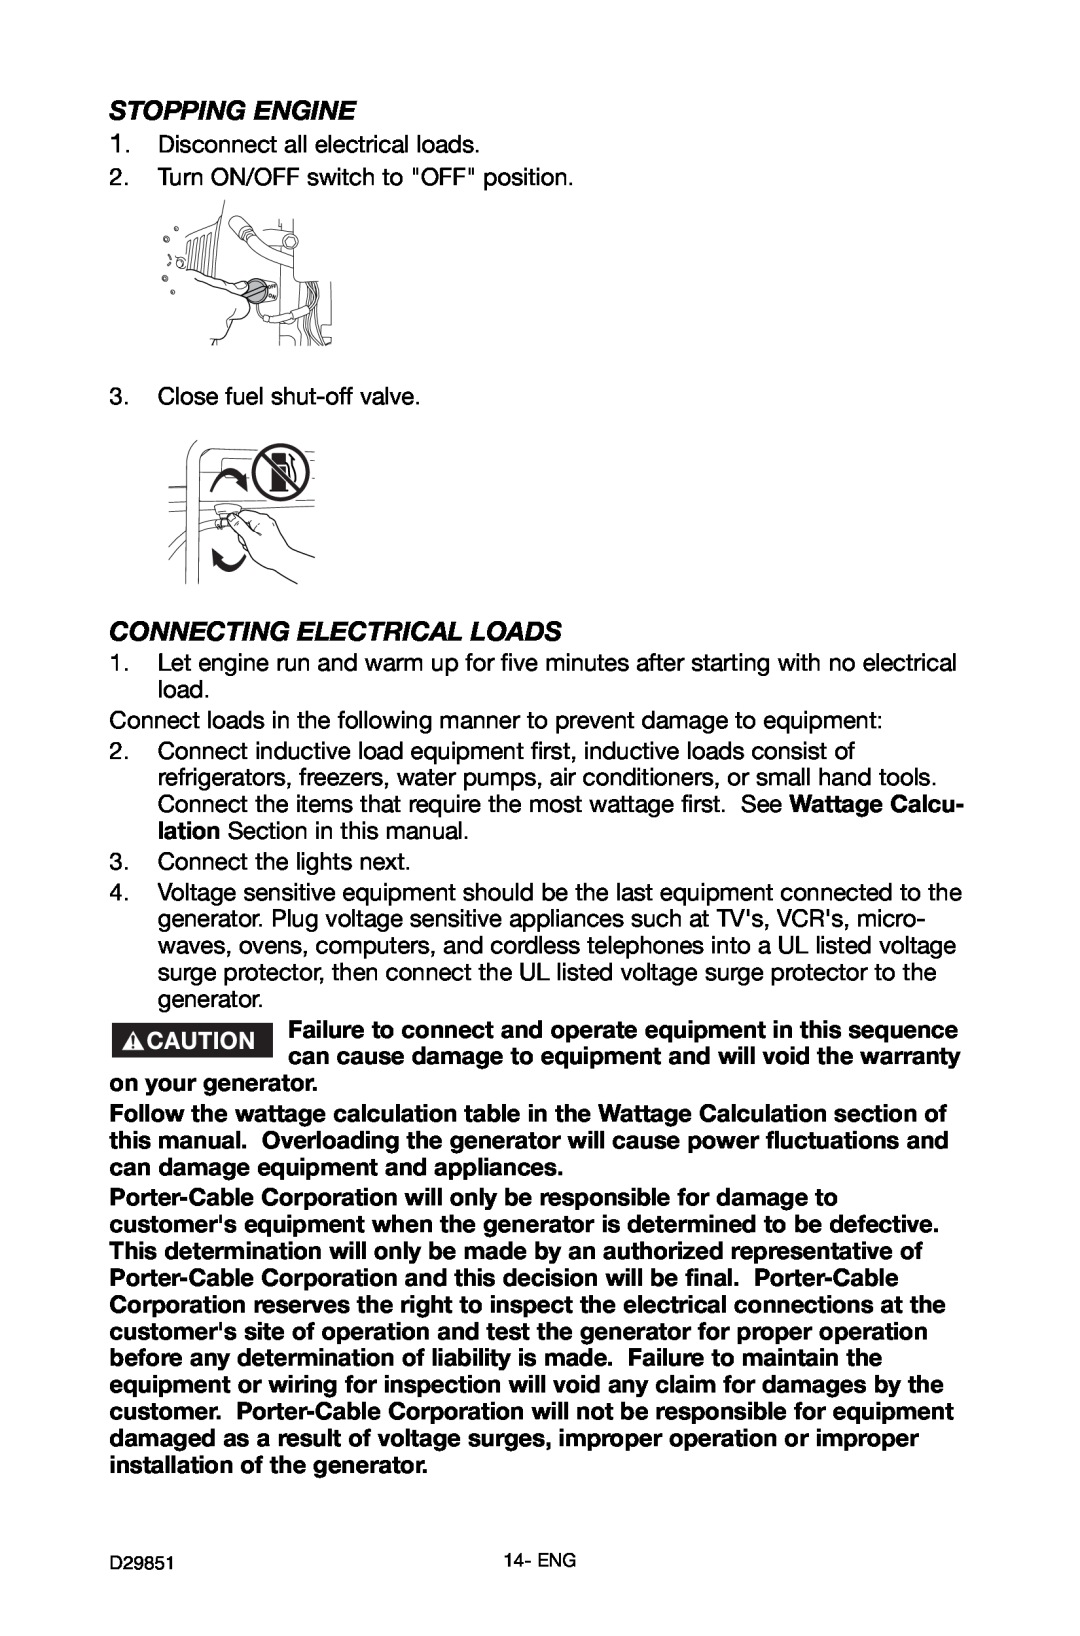 Porter-Cable D29851-038-0 instruction manual Stopping Engine, Connecting Electrical Loads 